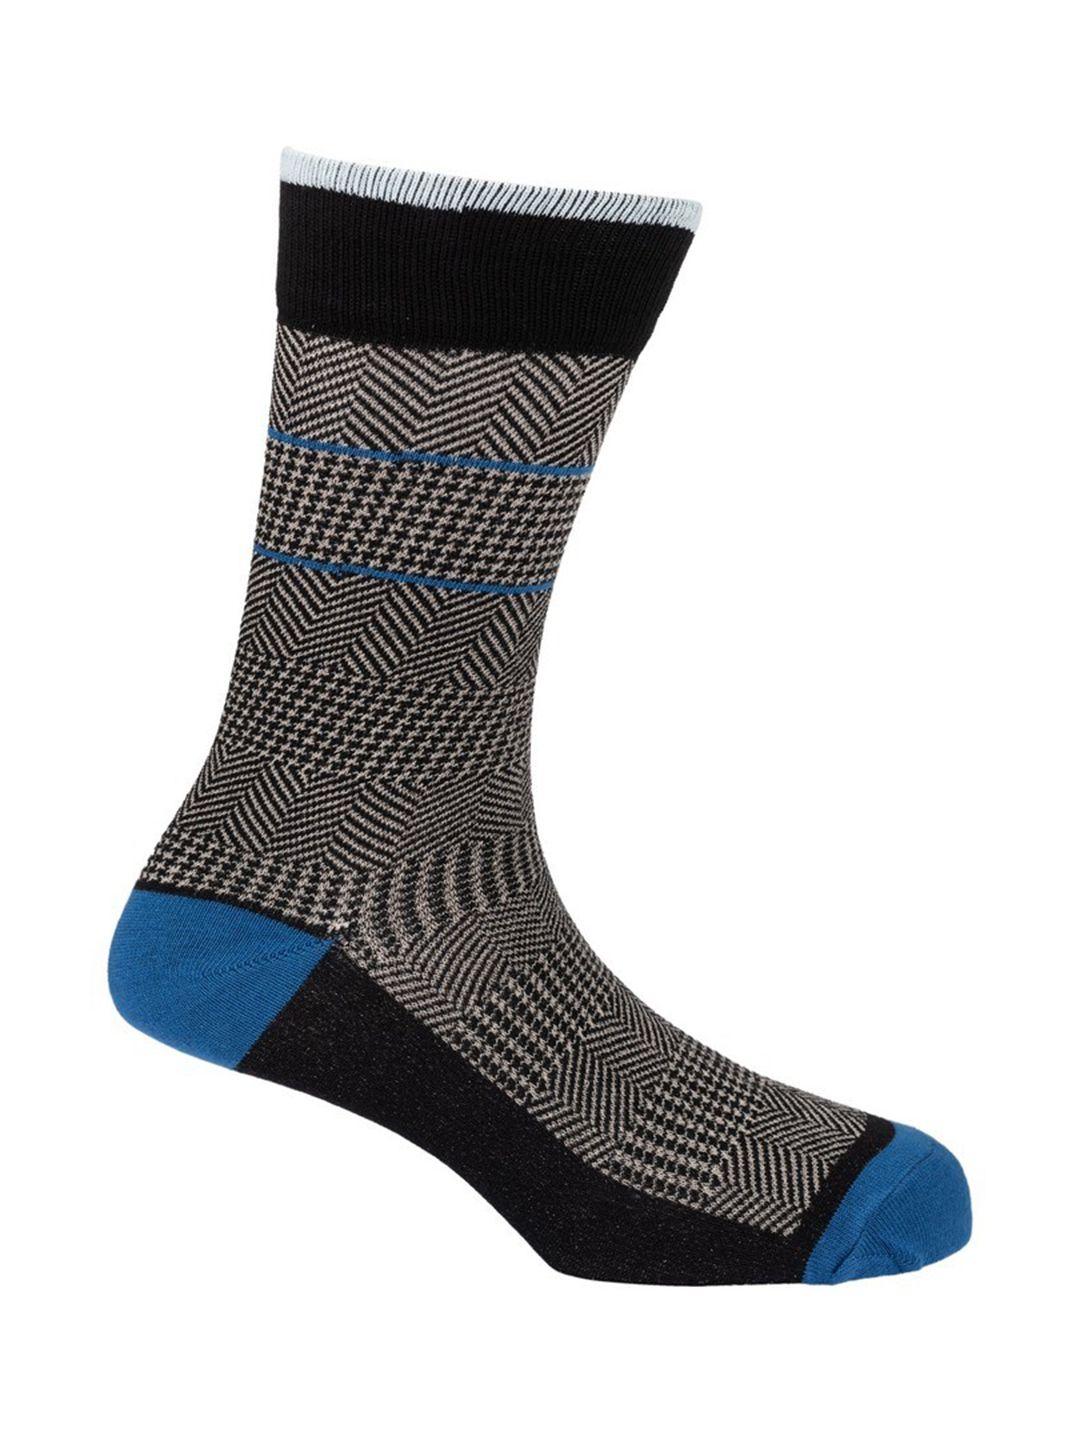 the-tie-hub-black-and-blue-striped-ankle-length-socks